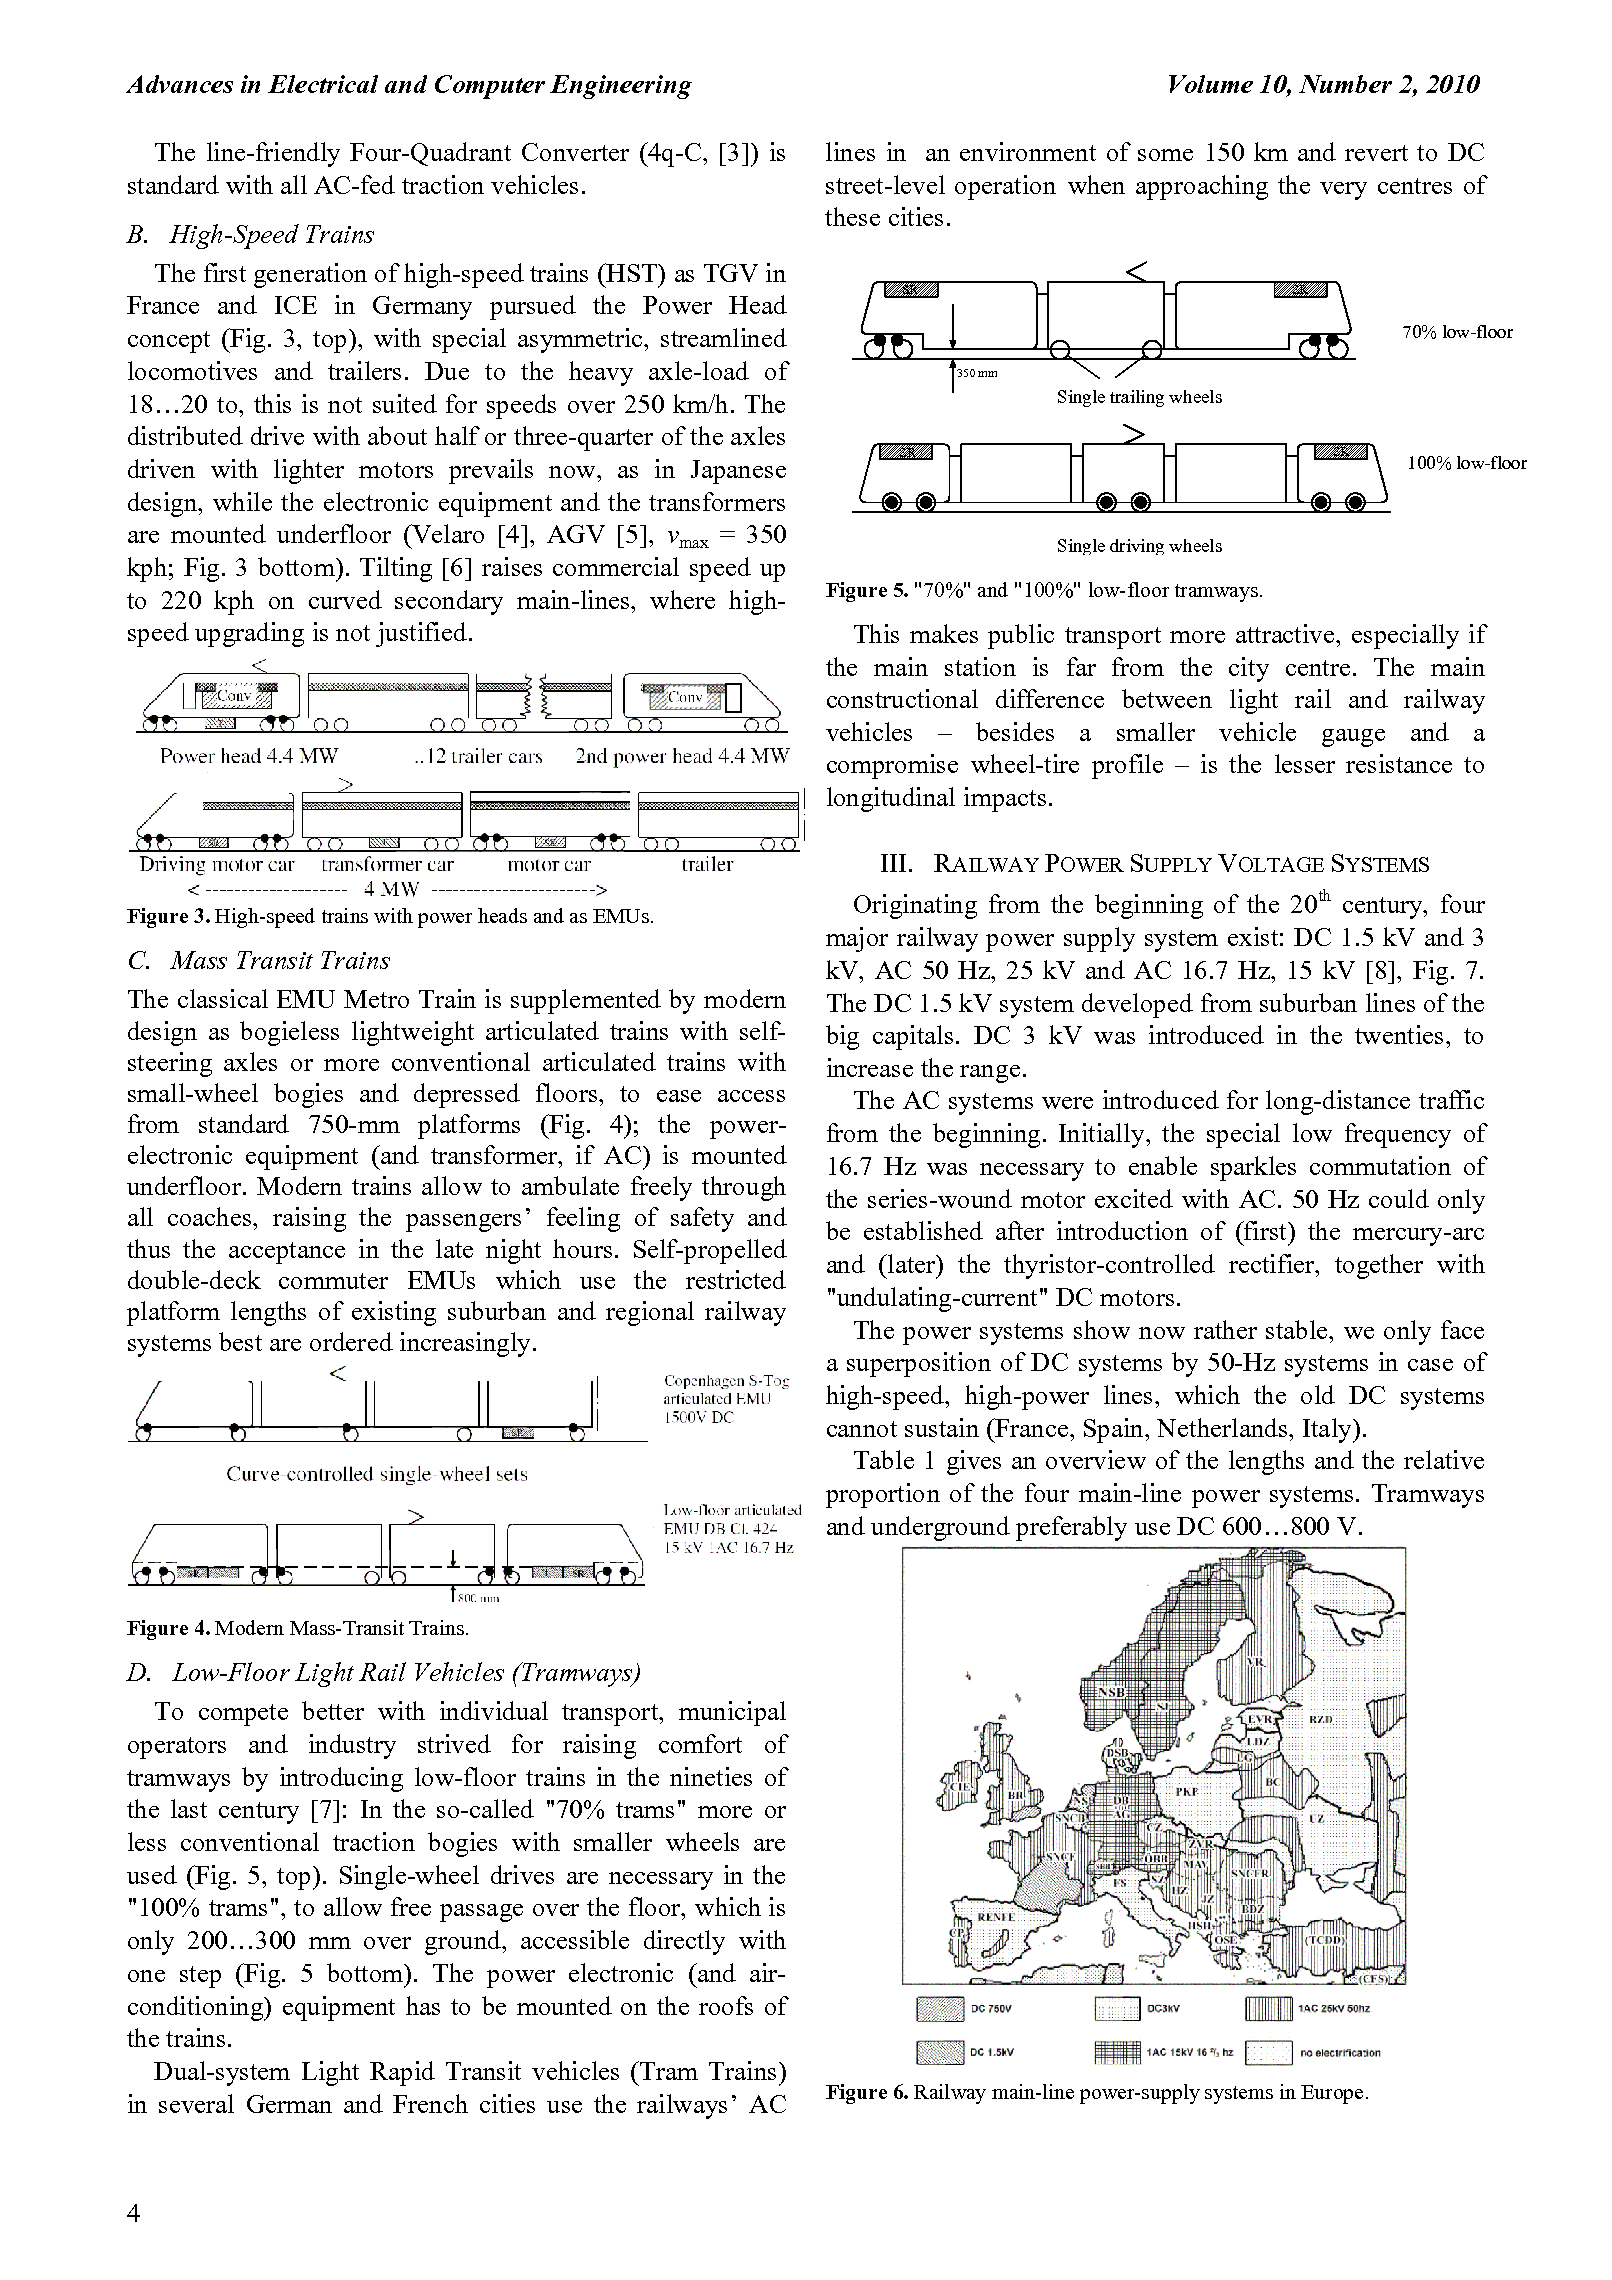 PDF Quickview for paper with DOI:10.4316/AECE.2010.02001